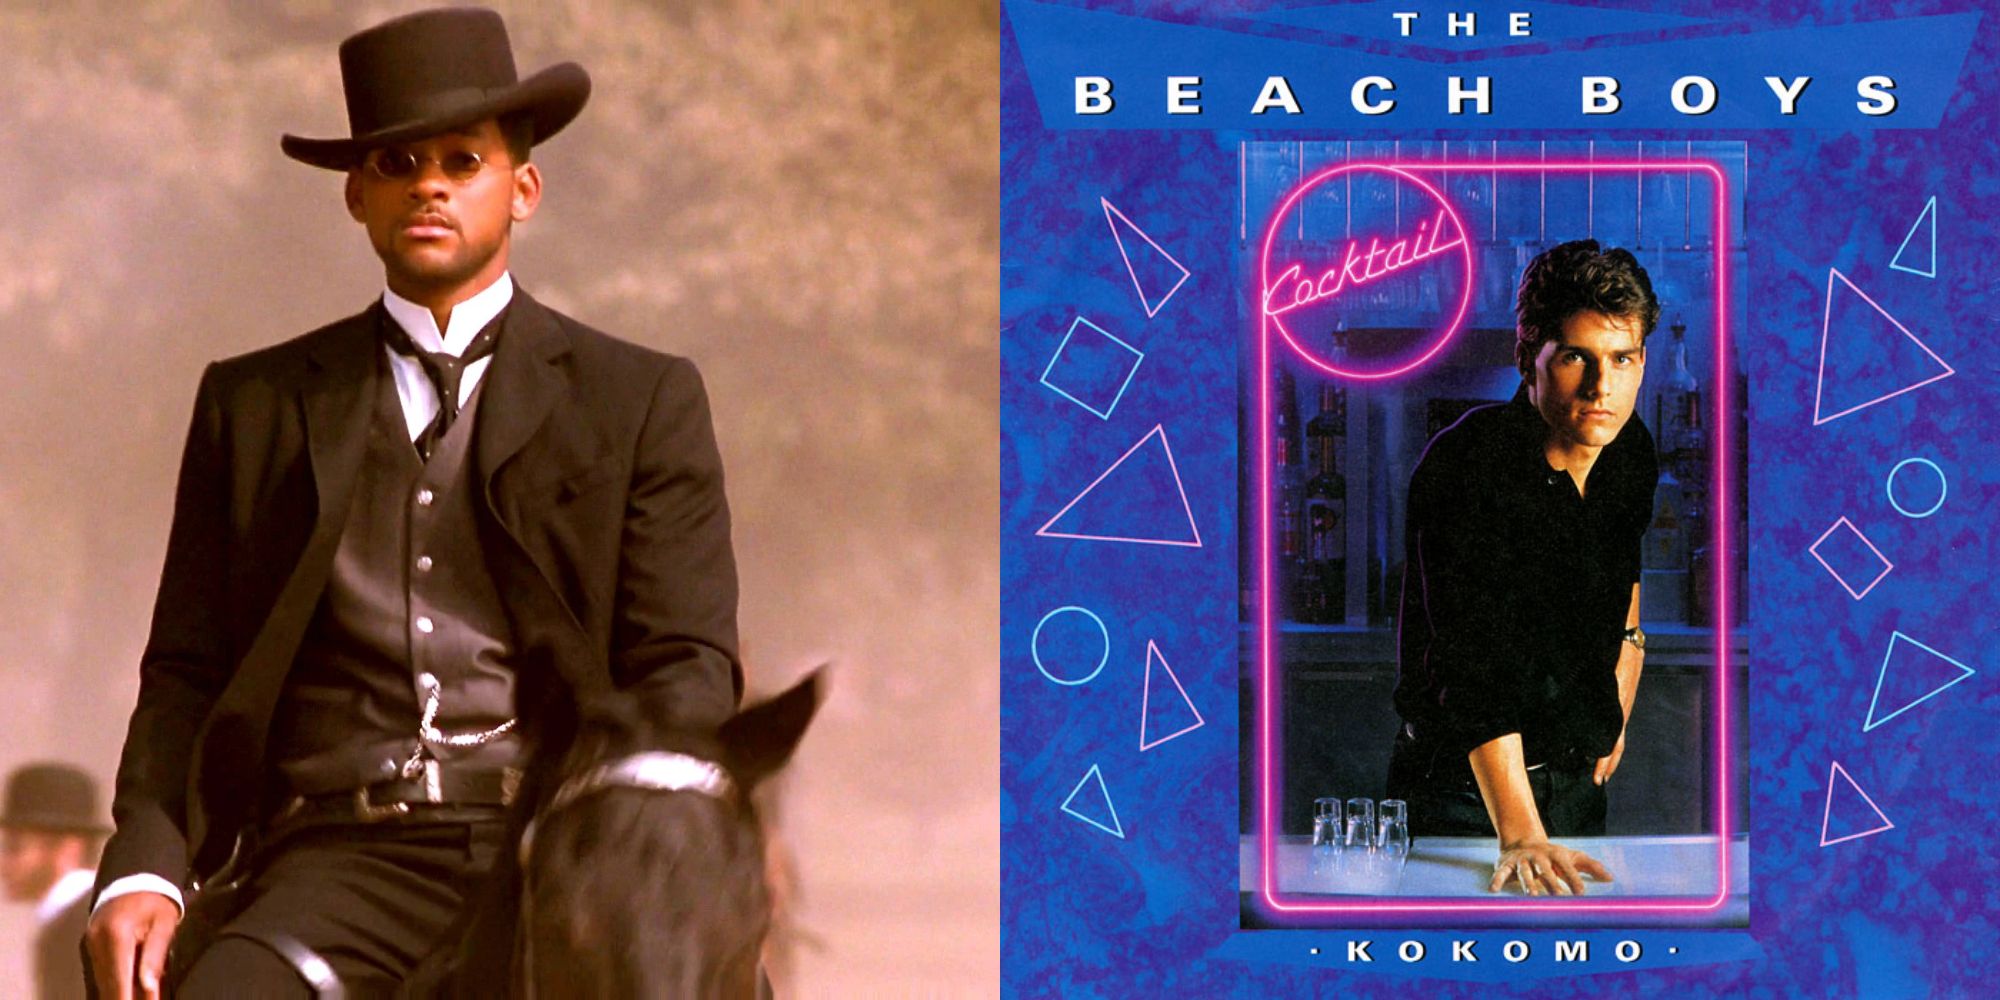 Will Smith in Wild Wild West and the cover art for Kokomo by The Beach Boys